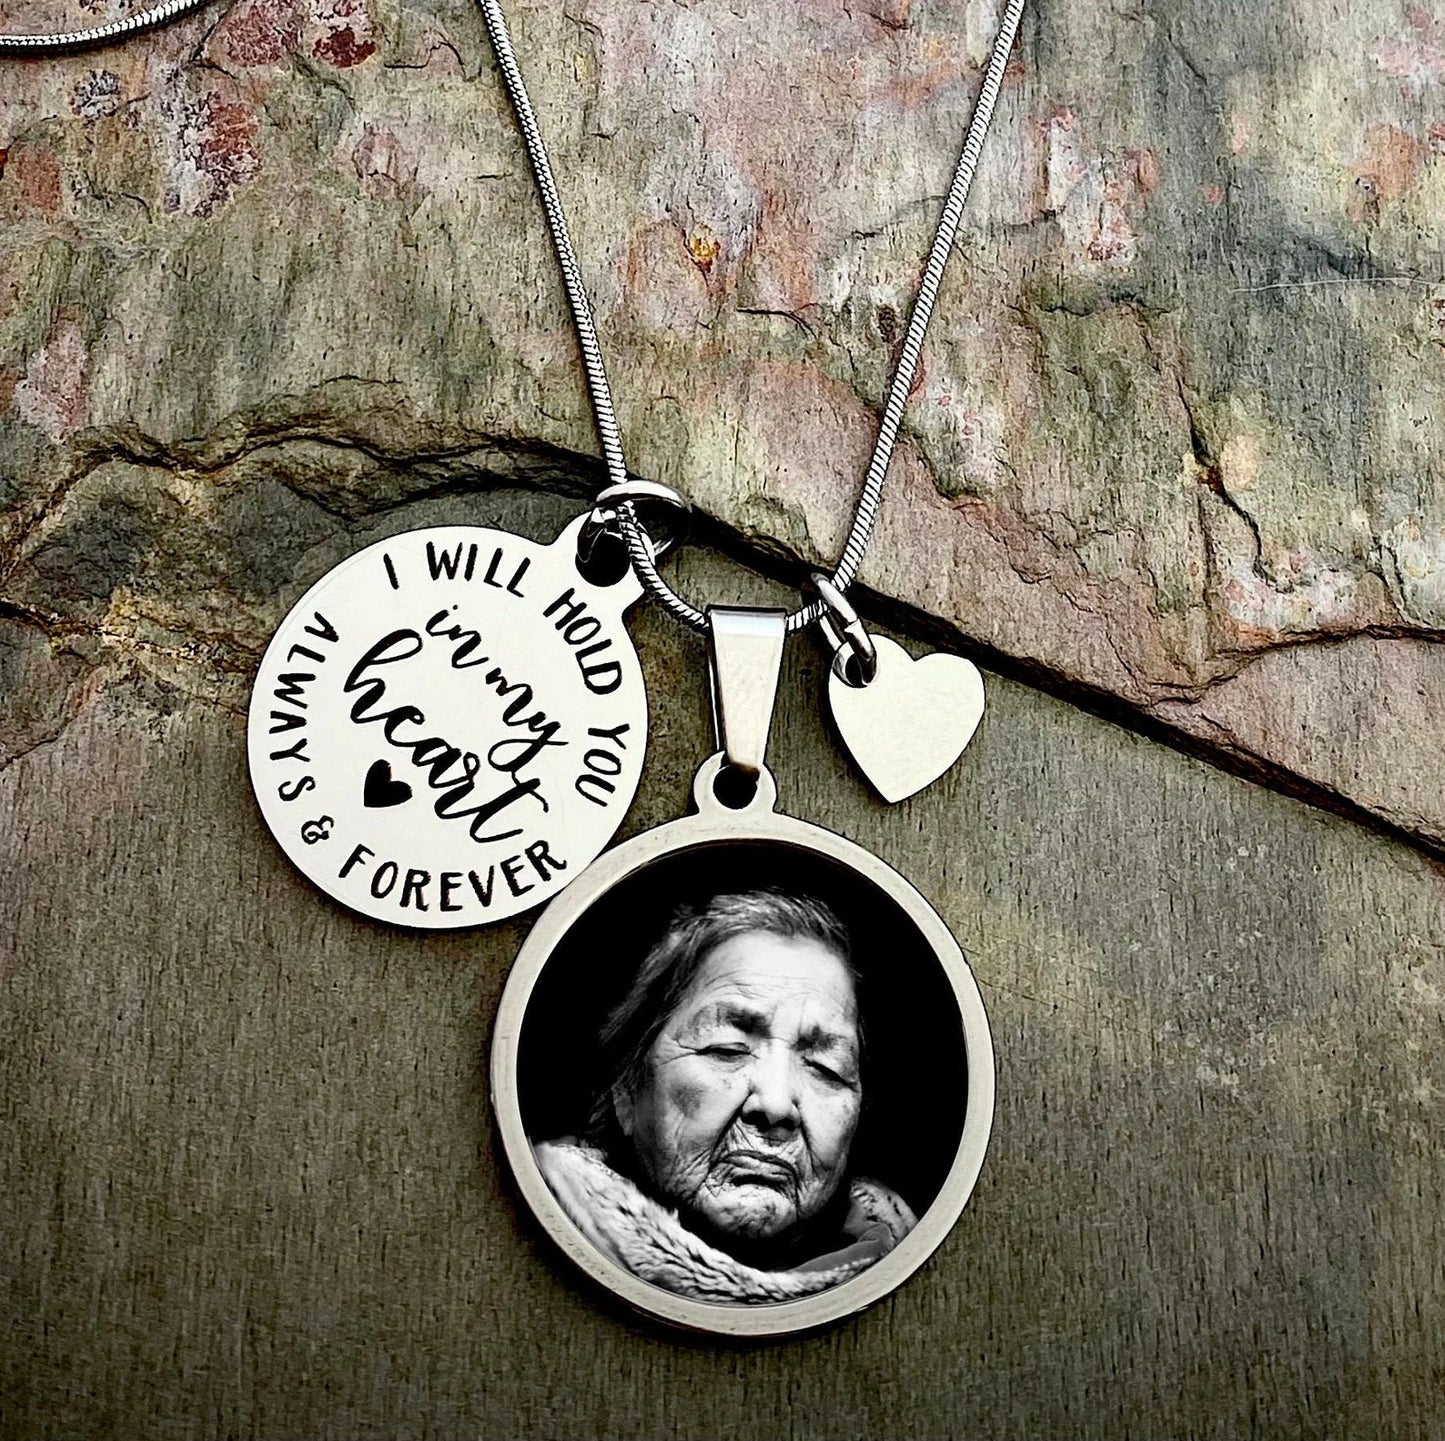 Memory Photo Necklace- I will hold you in my heart always and forever